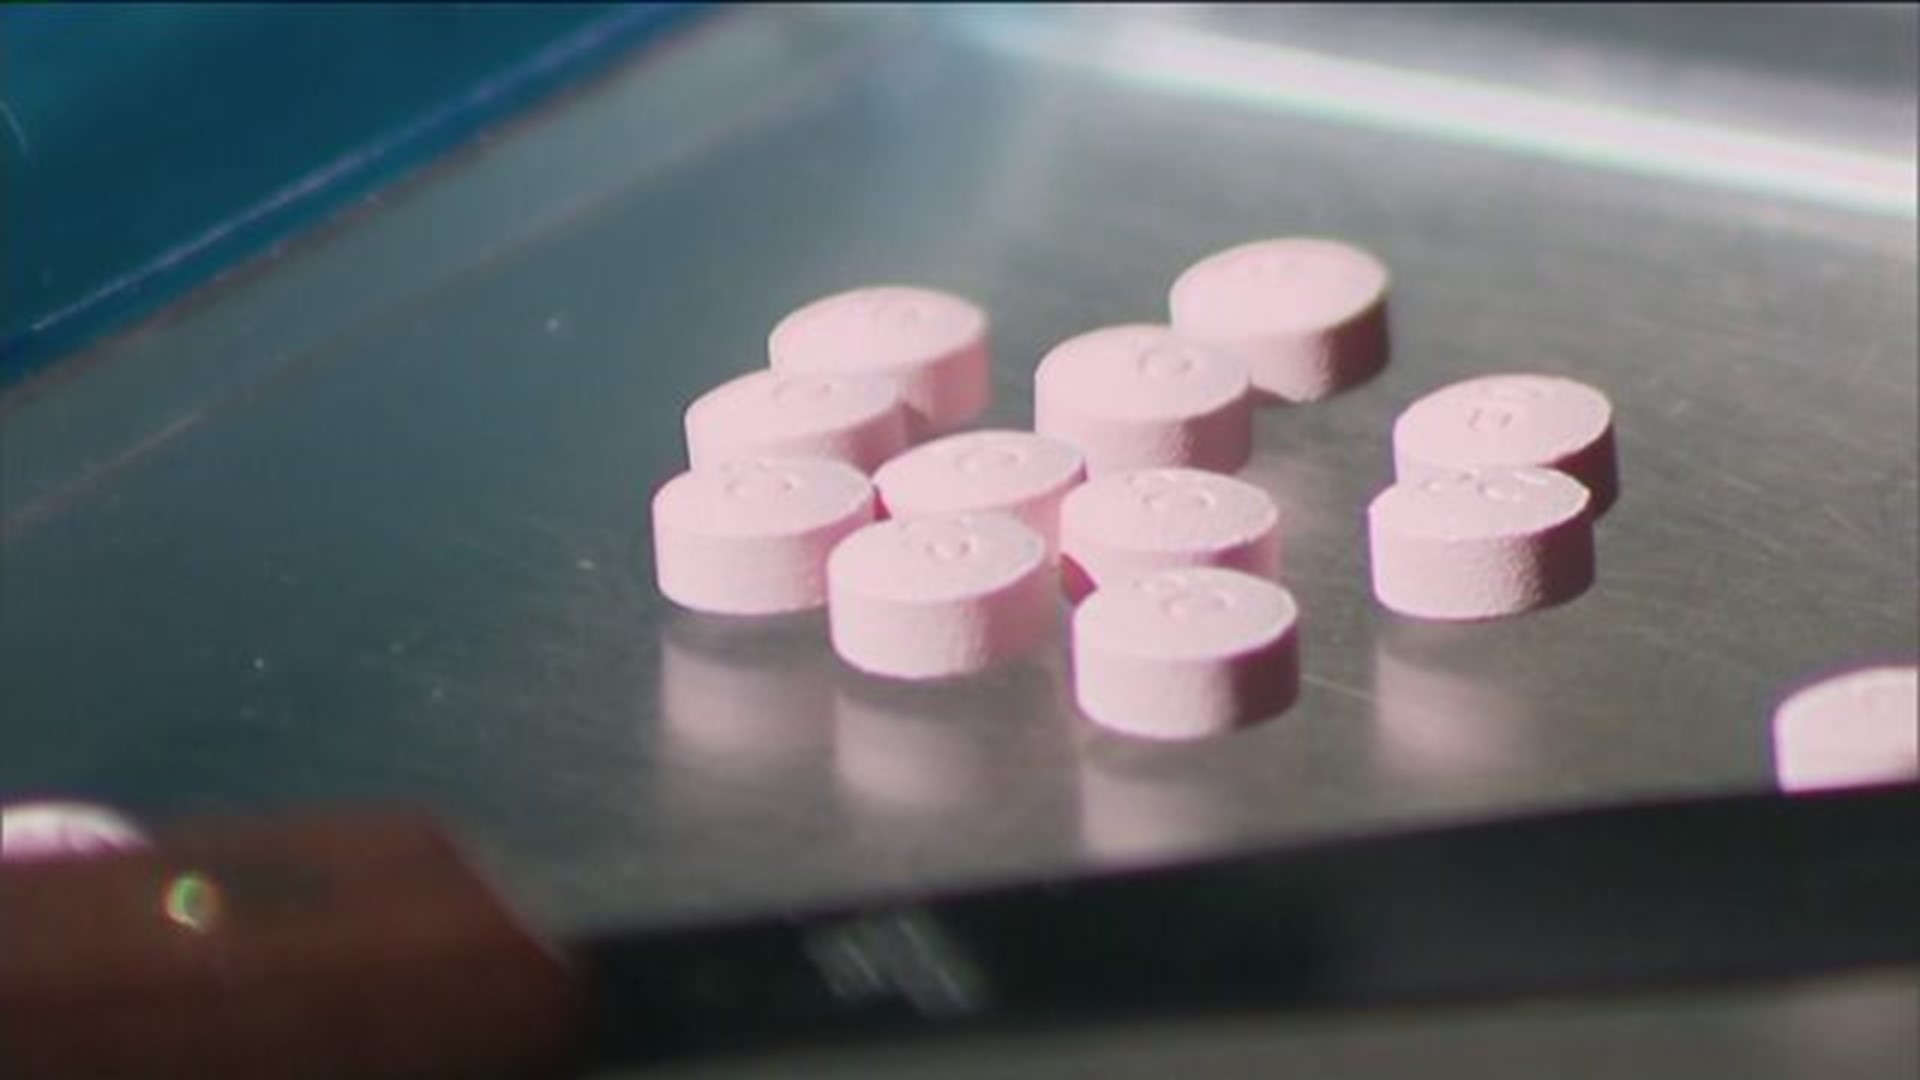 Finding help for opioid addiction